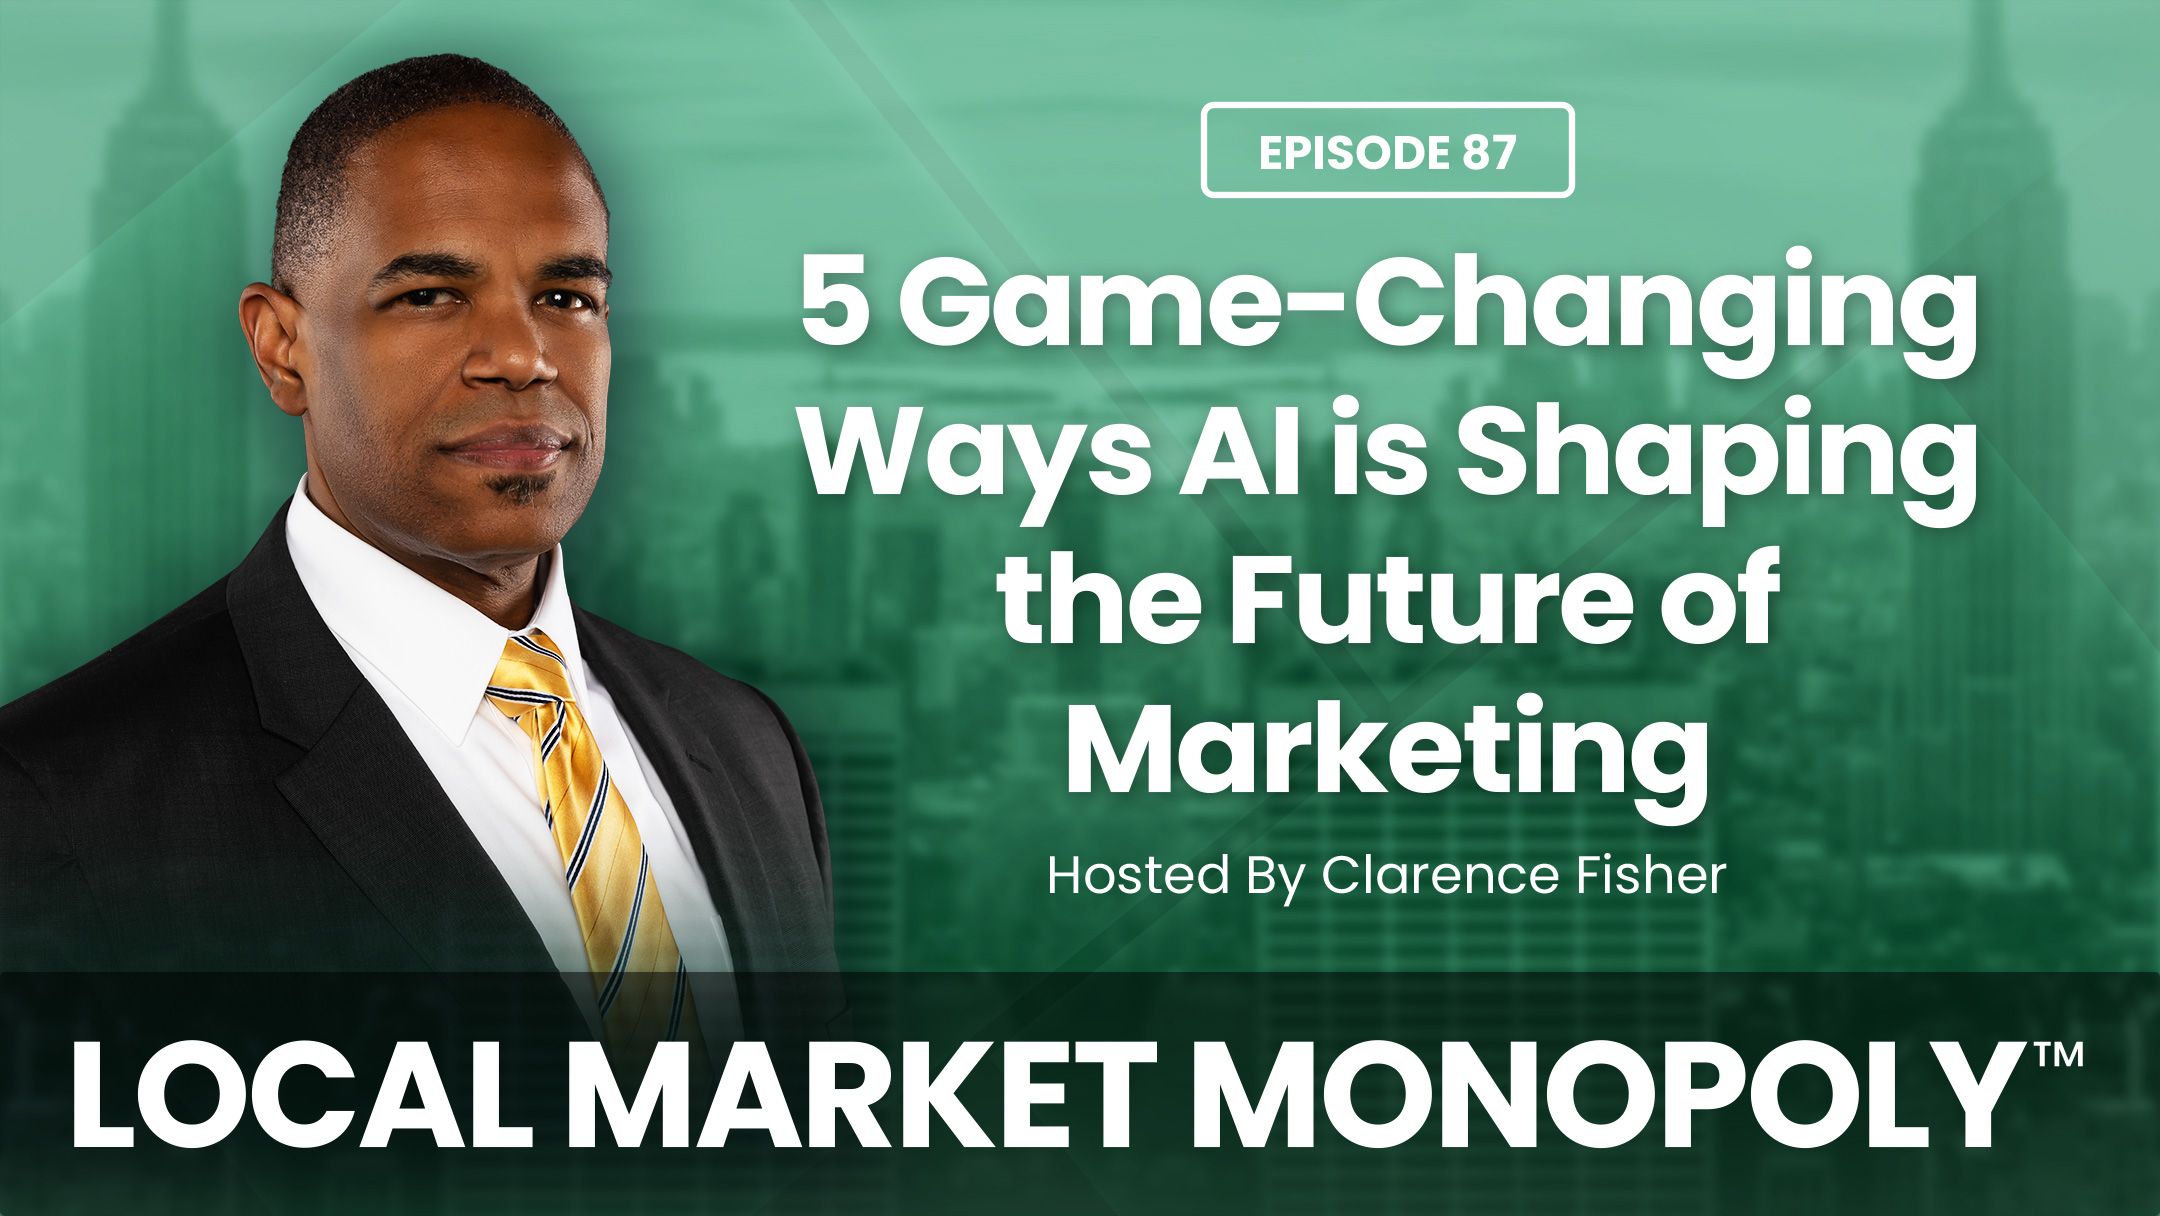 5 Game-Changing Ways AI is Shaping the Future of Marketing